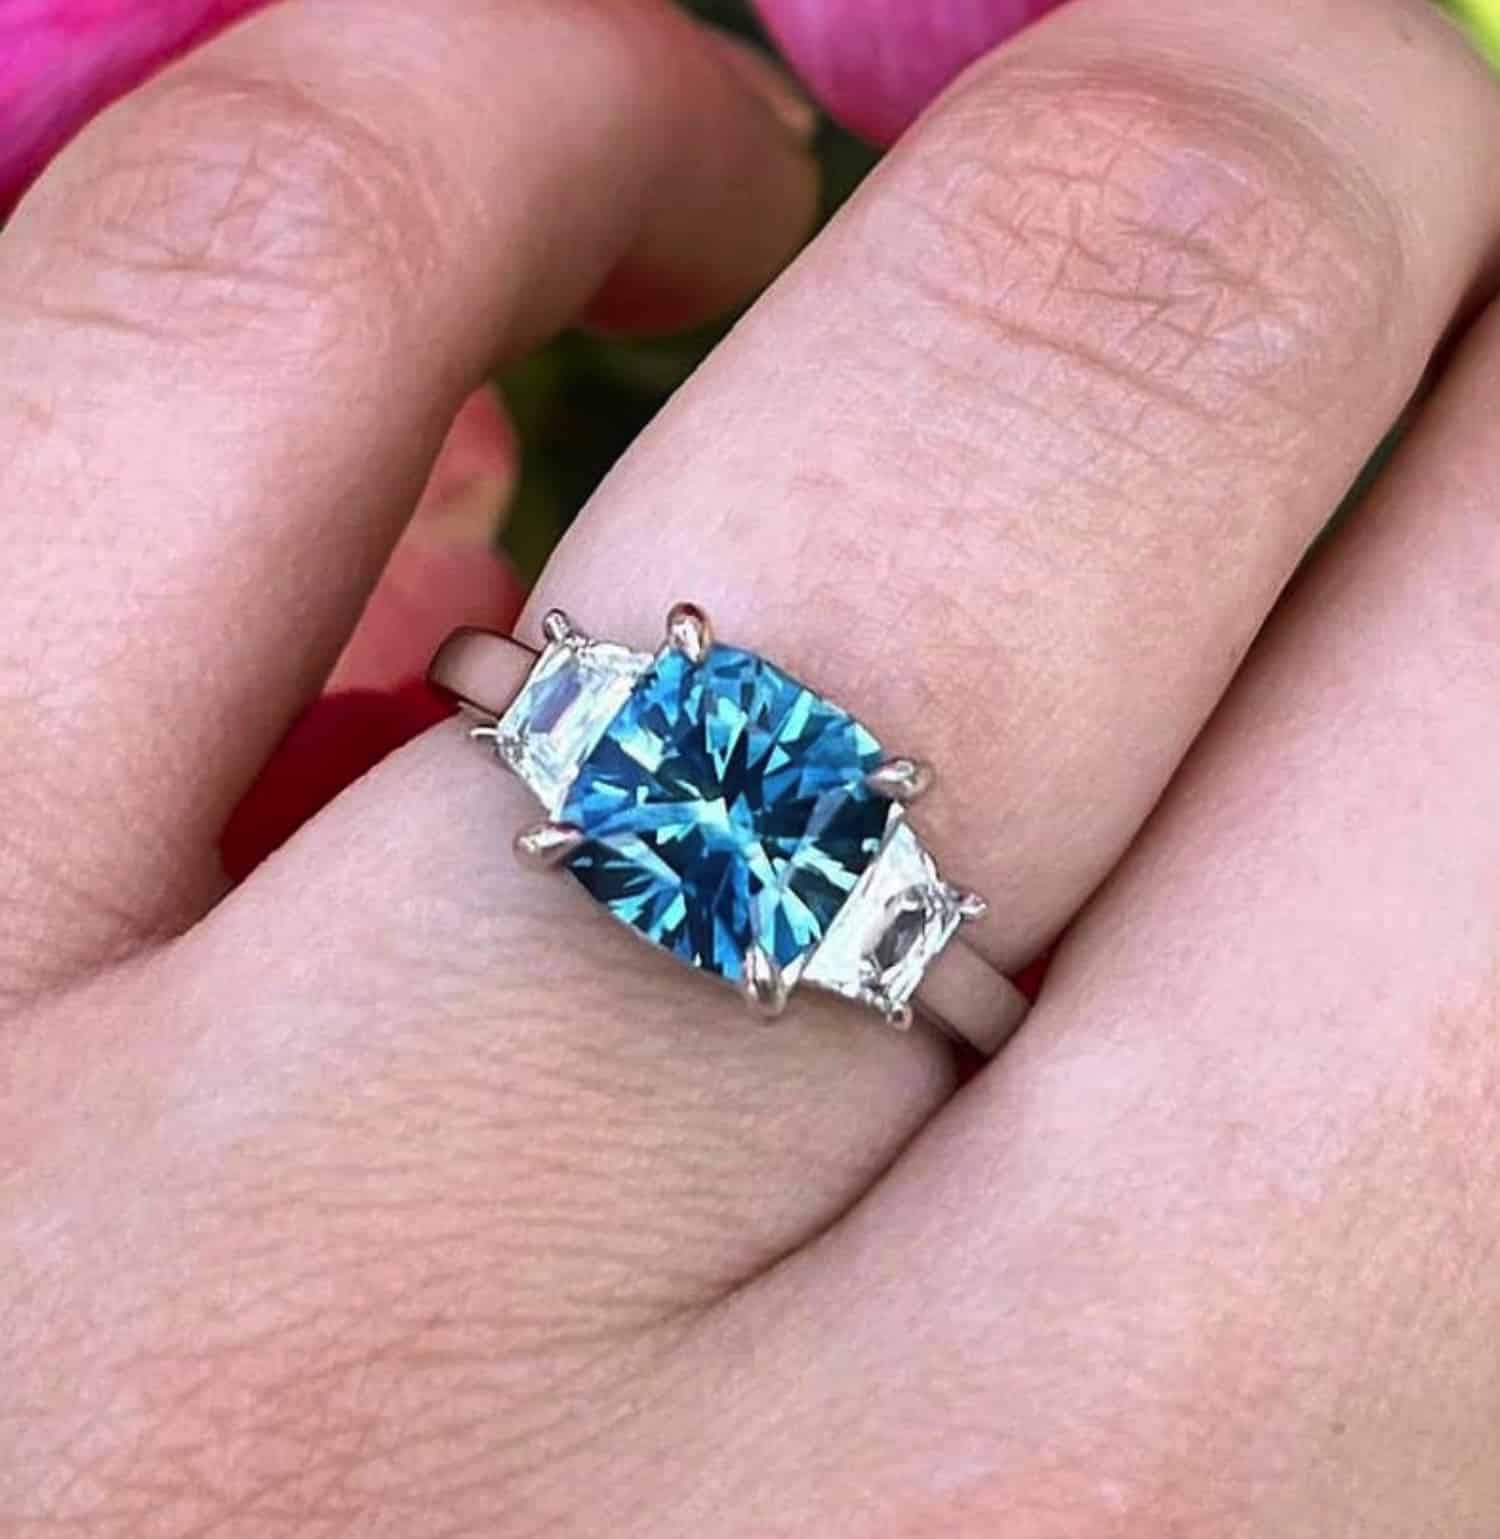 A photo from a customer review featuring a platinum "Damara" ring with a square teal Montana sapphire